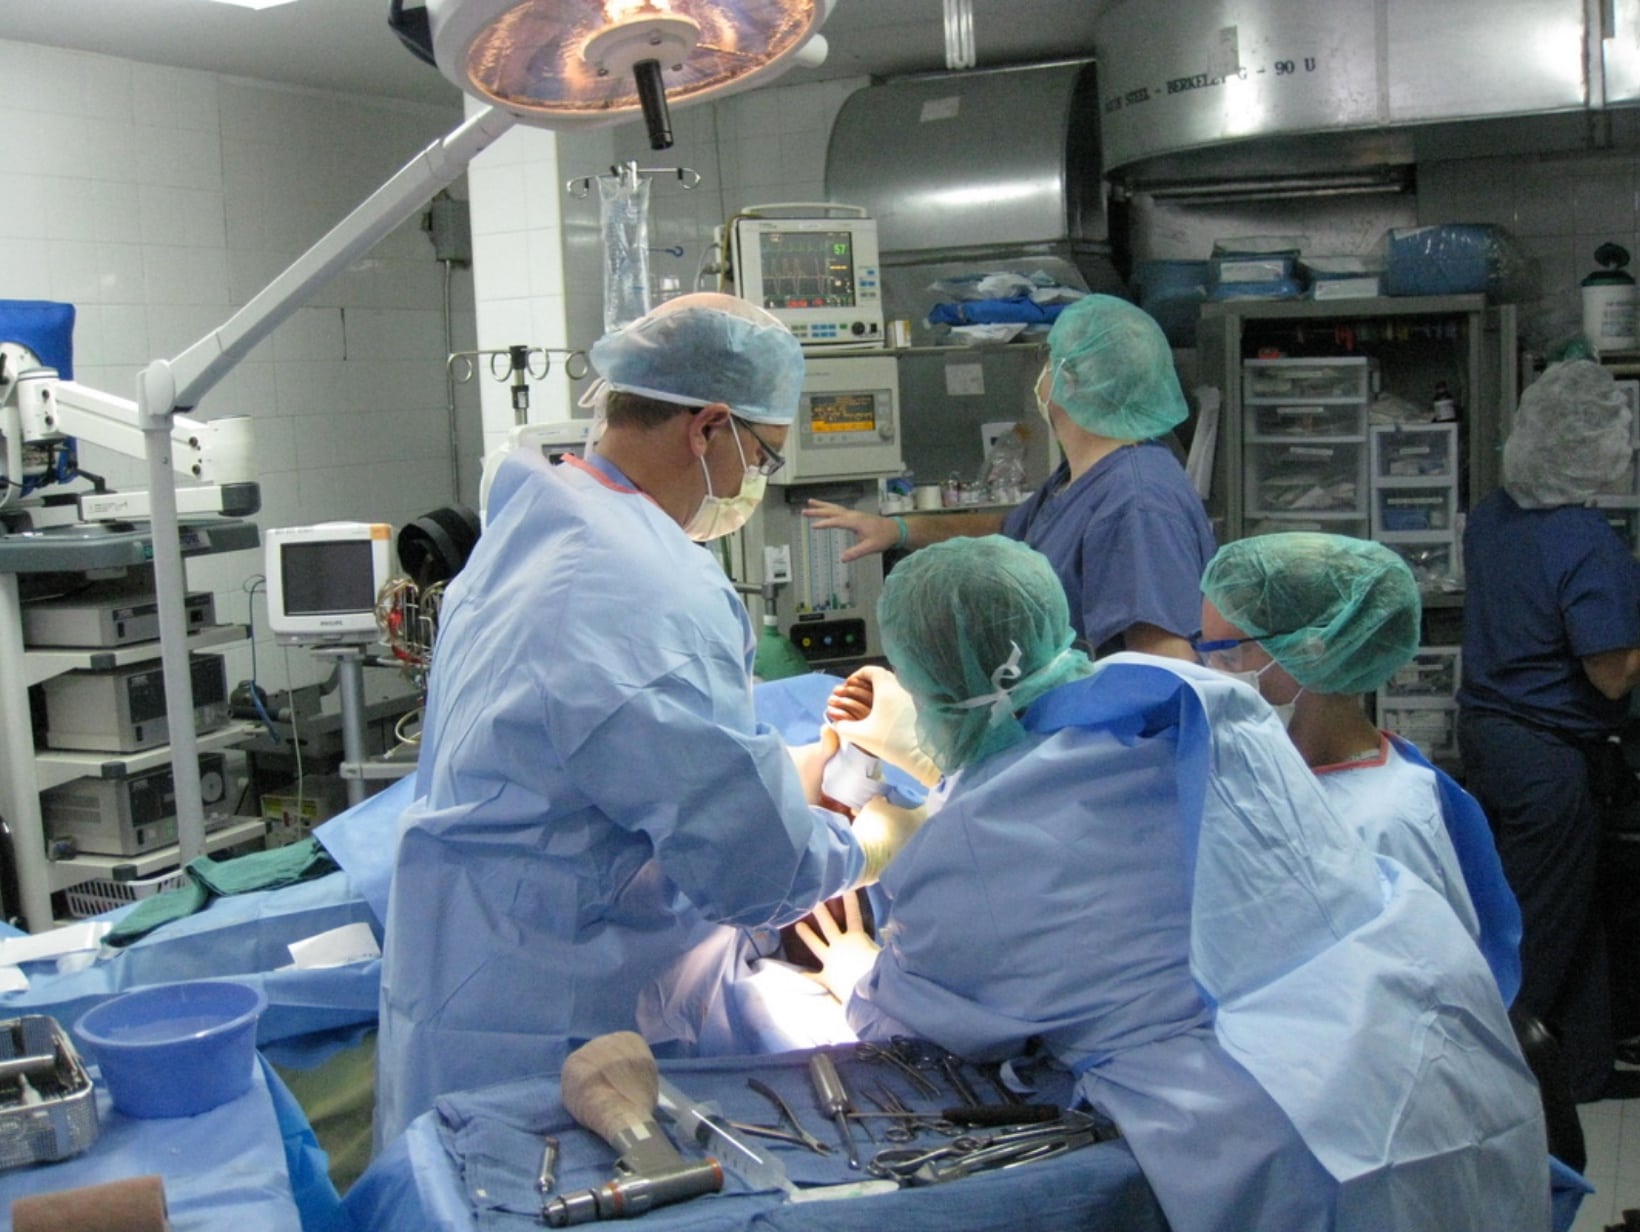 A group of people in a surgical room posing for photos.